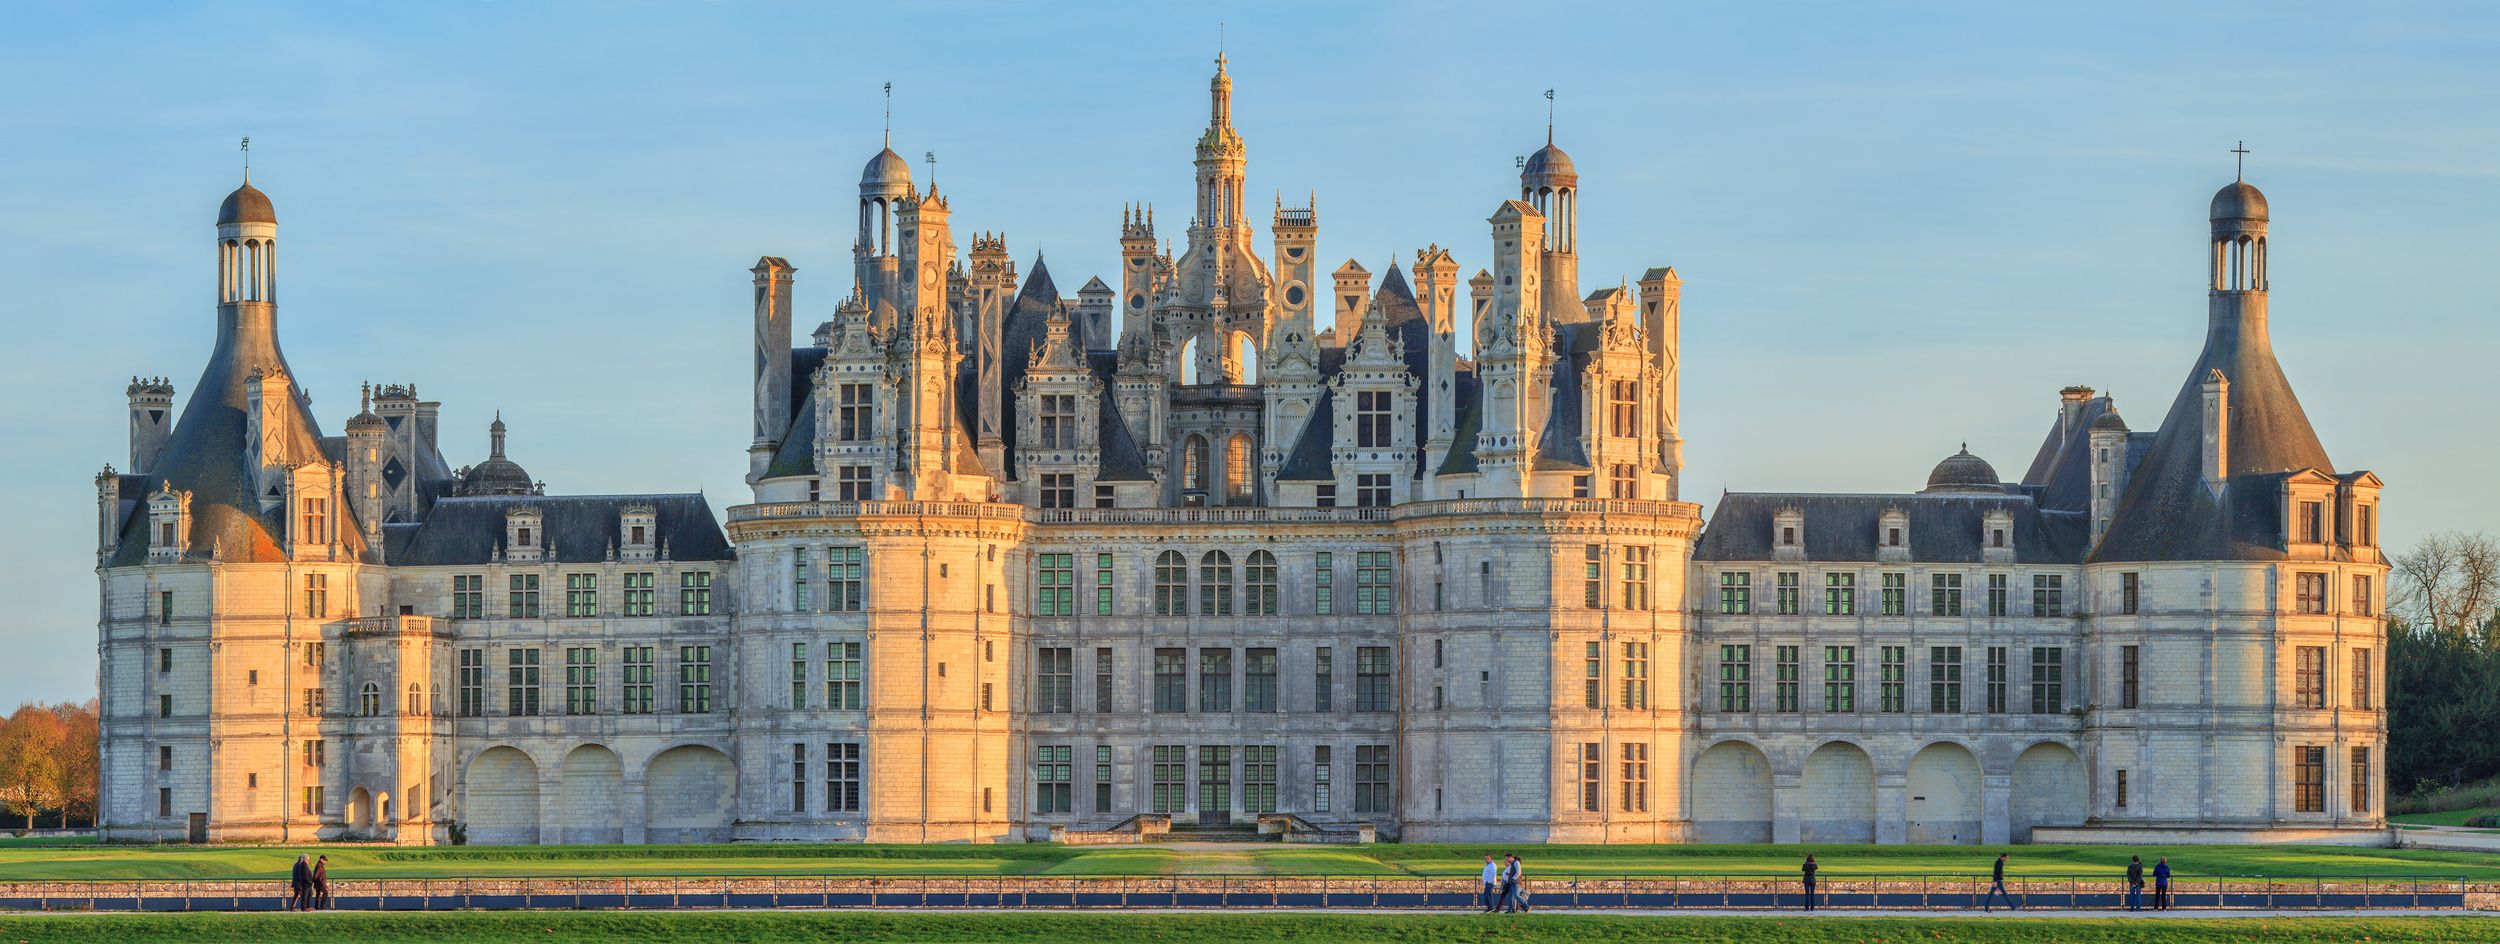 The Chambord Castle, one of the points of interest included in our travel book